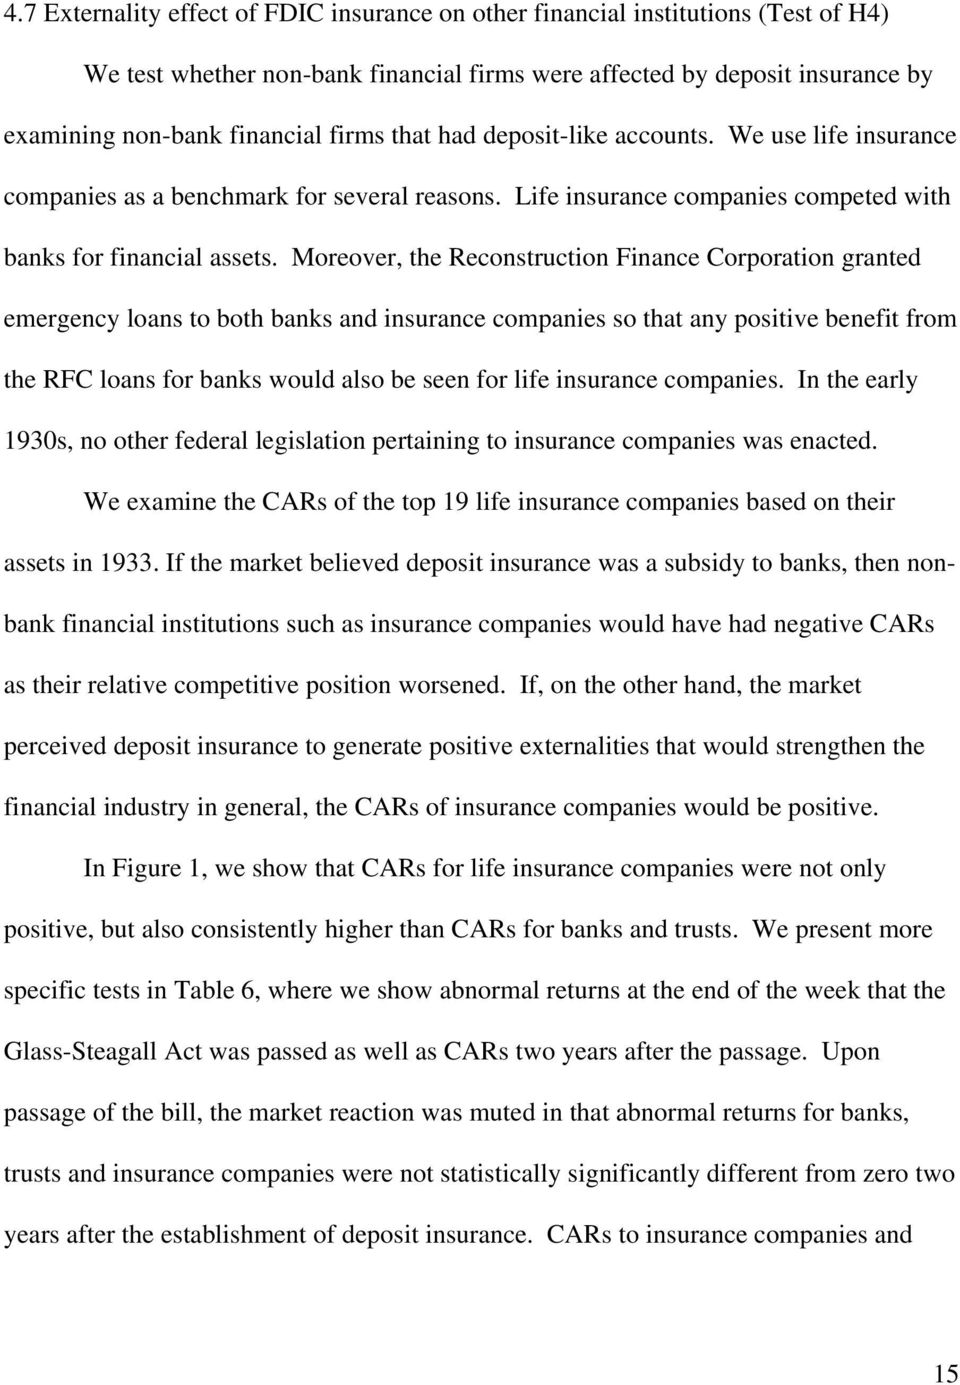 Moreover, the Reconstruction Finance Corporation granted emergency loans to both banks and insurance companies so that any positive benefit from the RFC loans for banks would also be seen for life